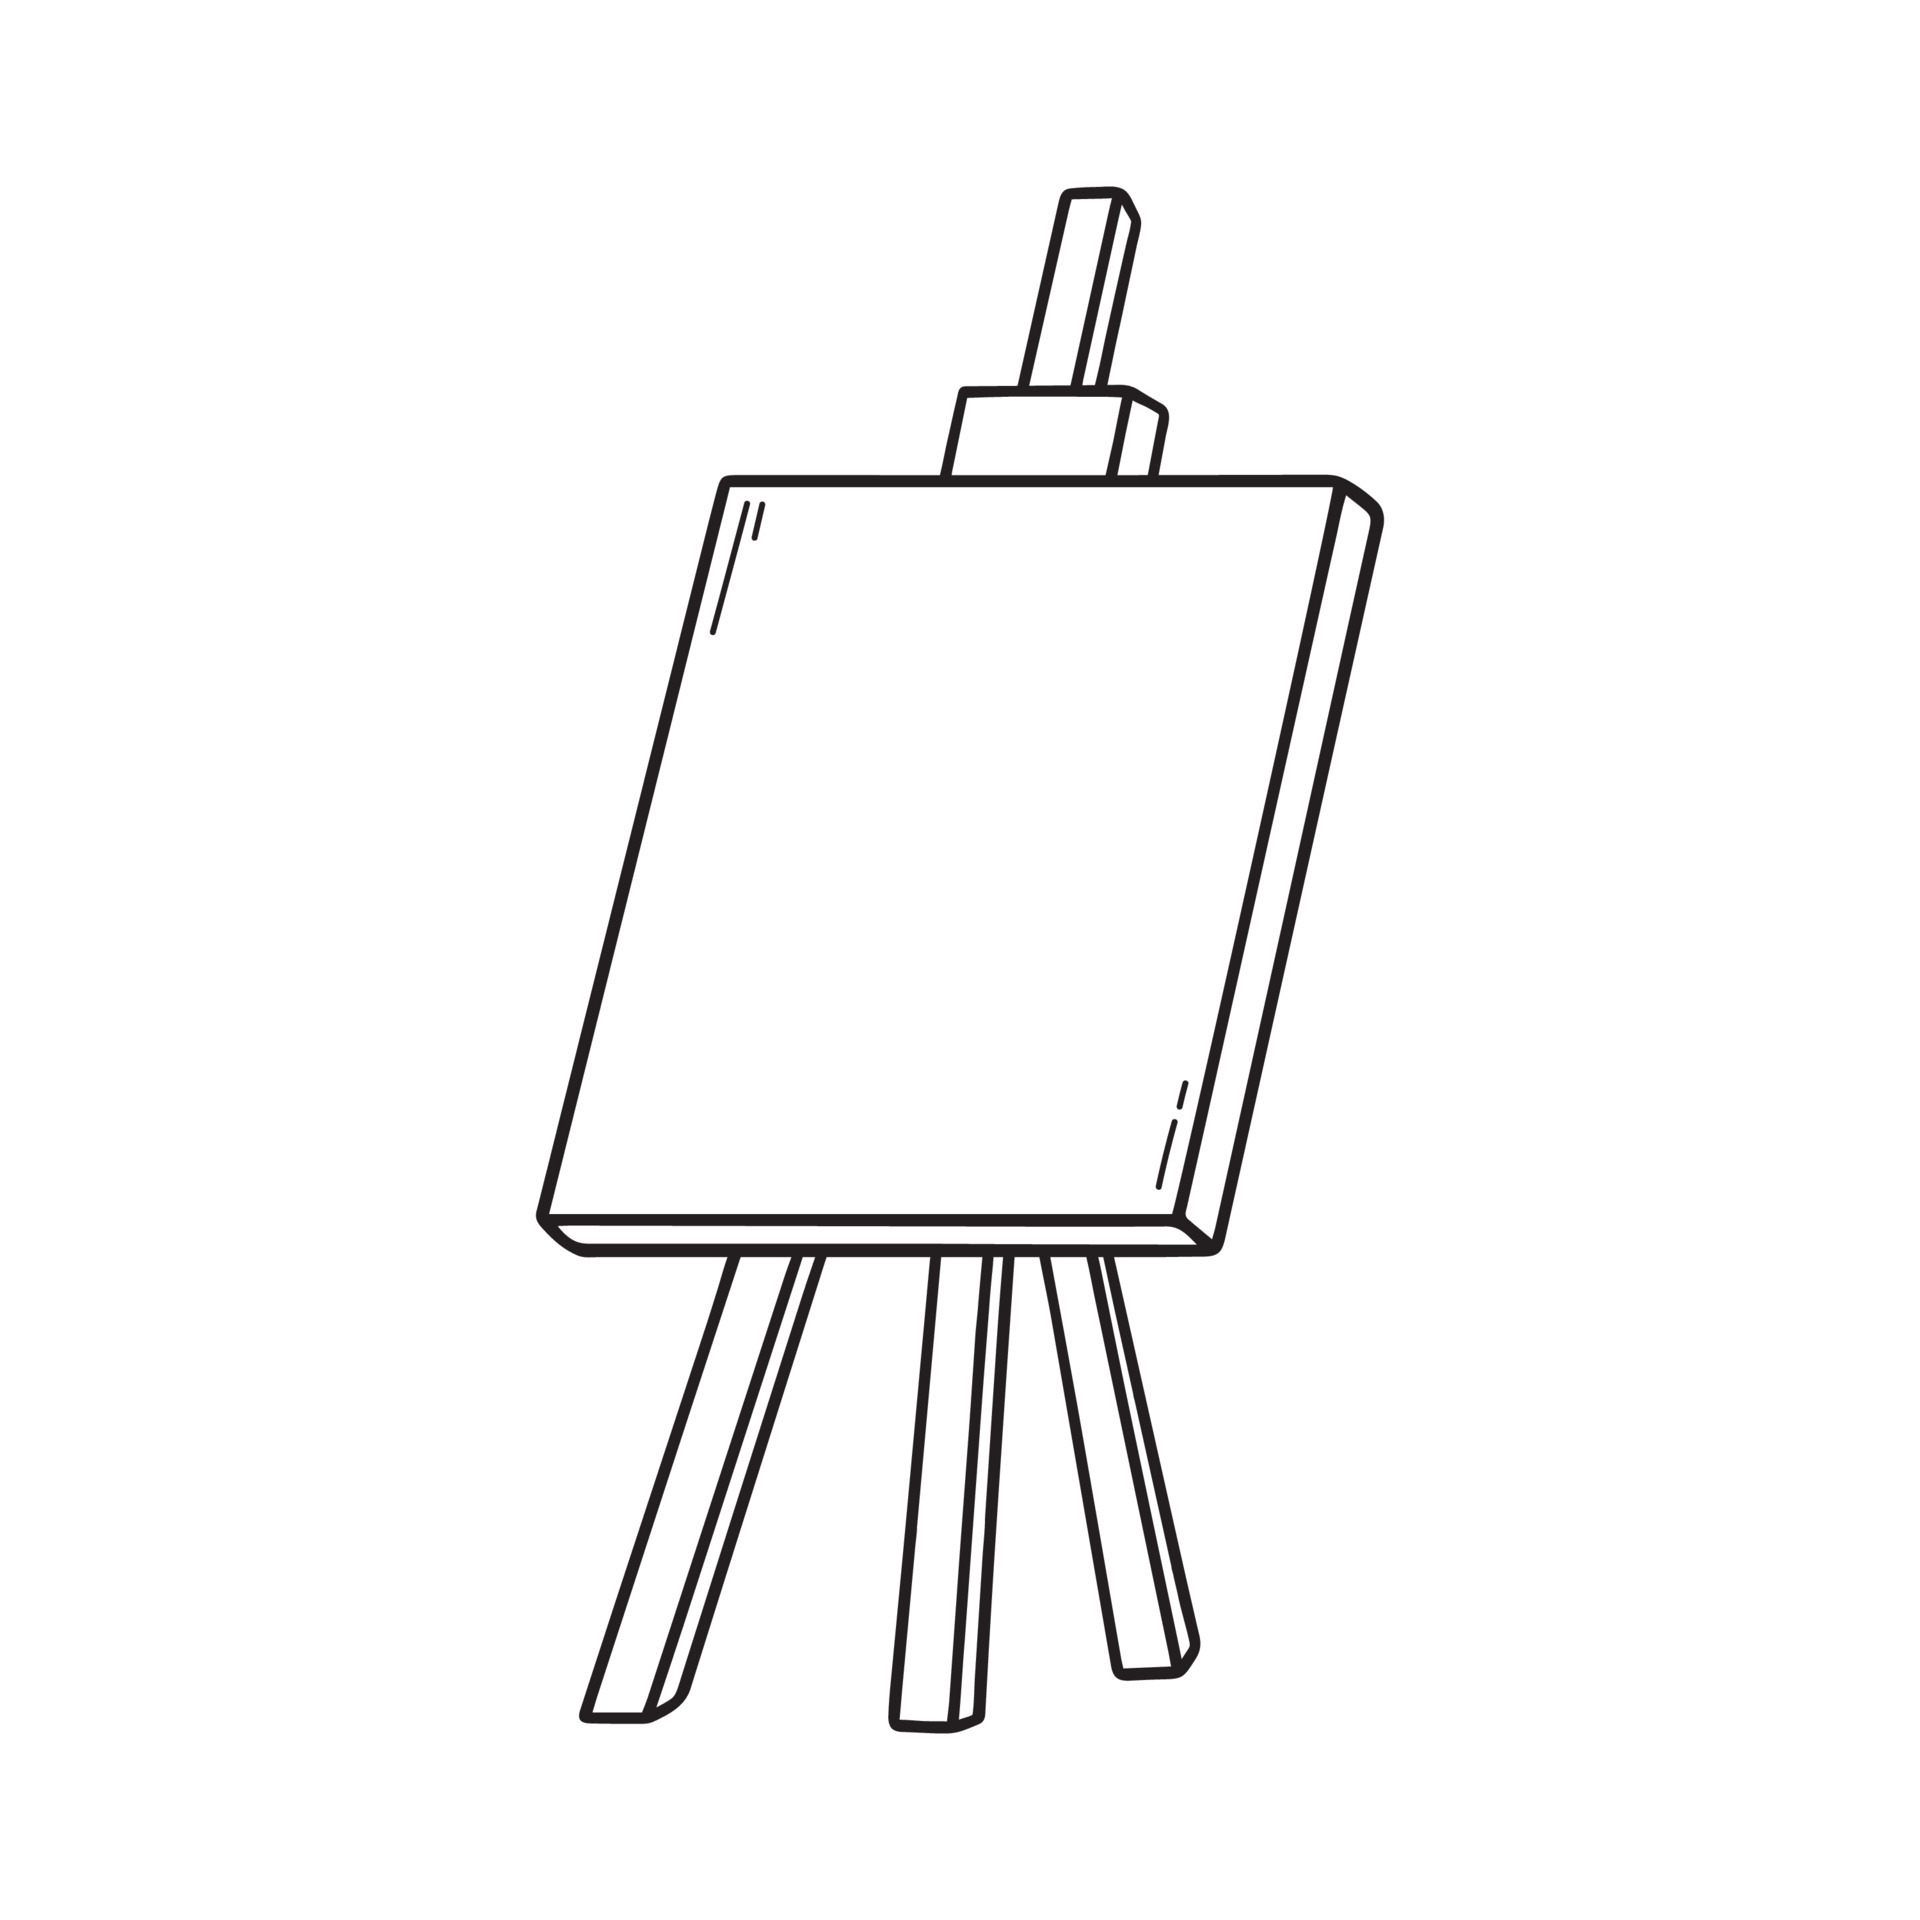 https://static.vecteezy.com/system/resources/previews/008/826/775/original/hand-drawn-easel-with-blank-canvas-doodle-art-equipment-in-sketch-style-illustration-isolated-on-white-background-vector.jpg